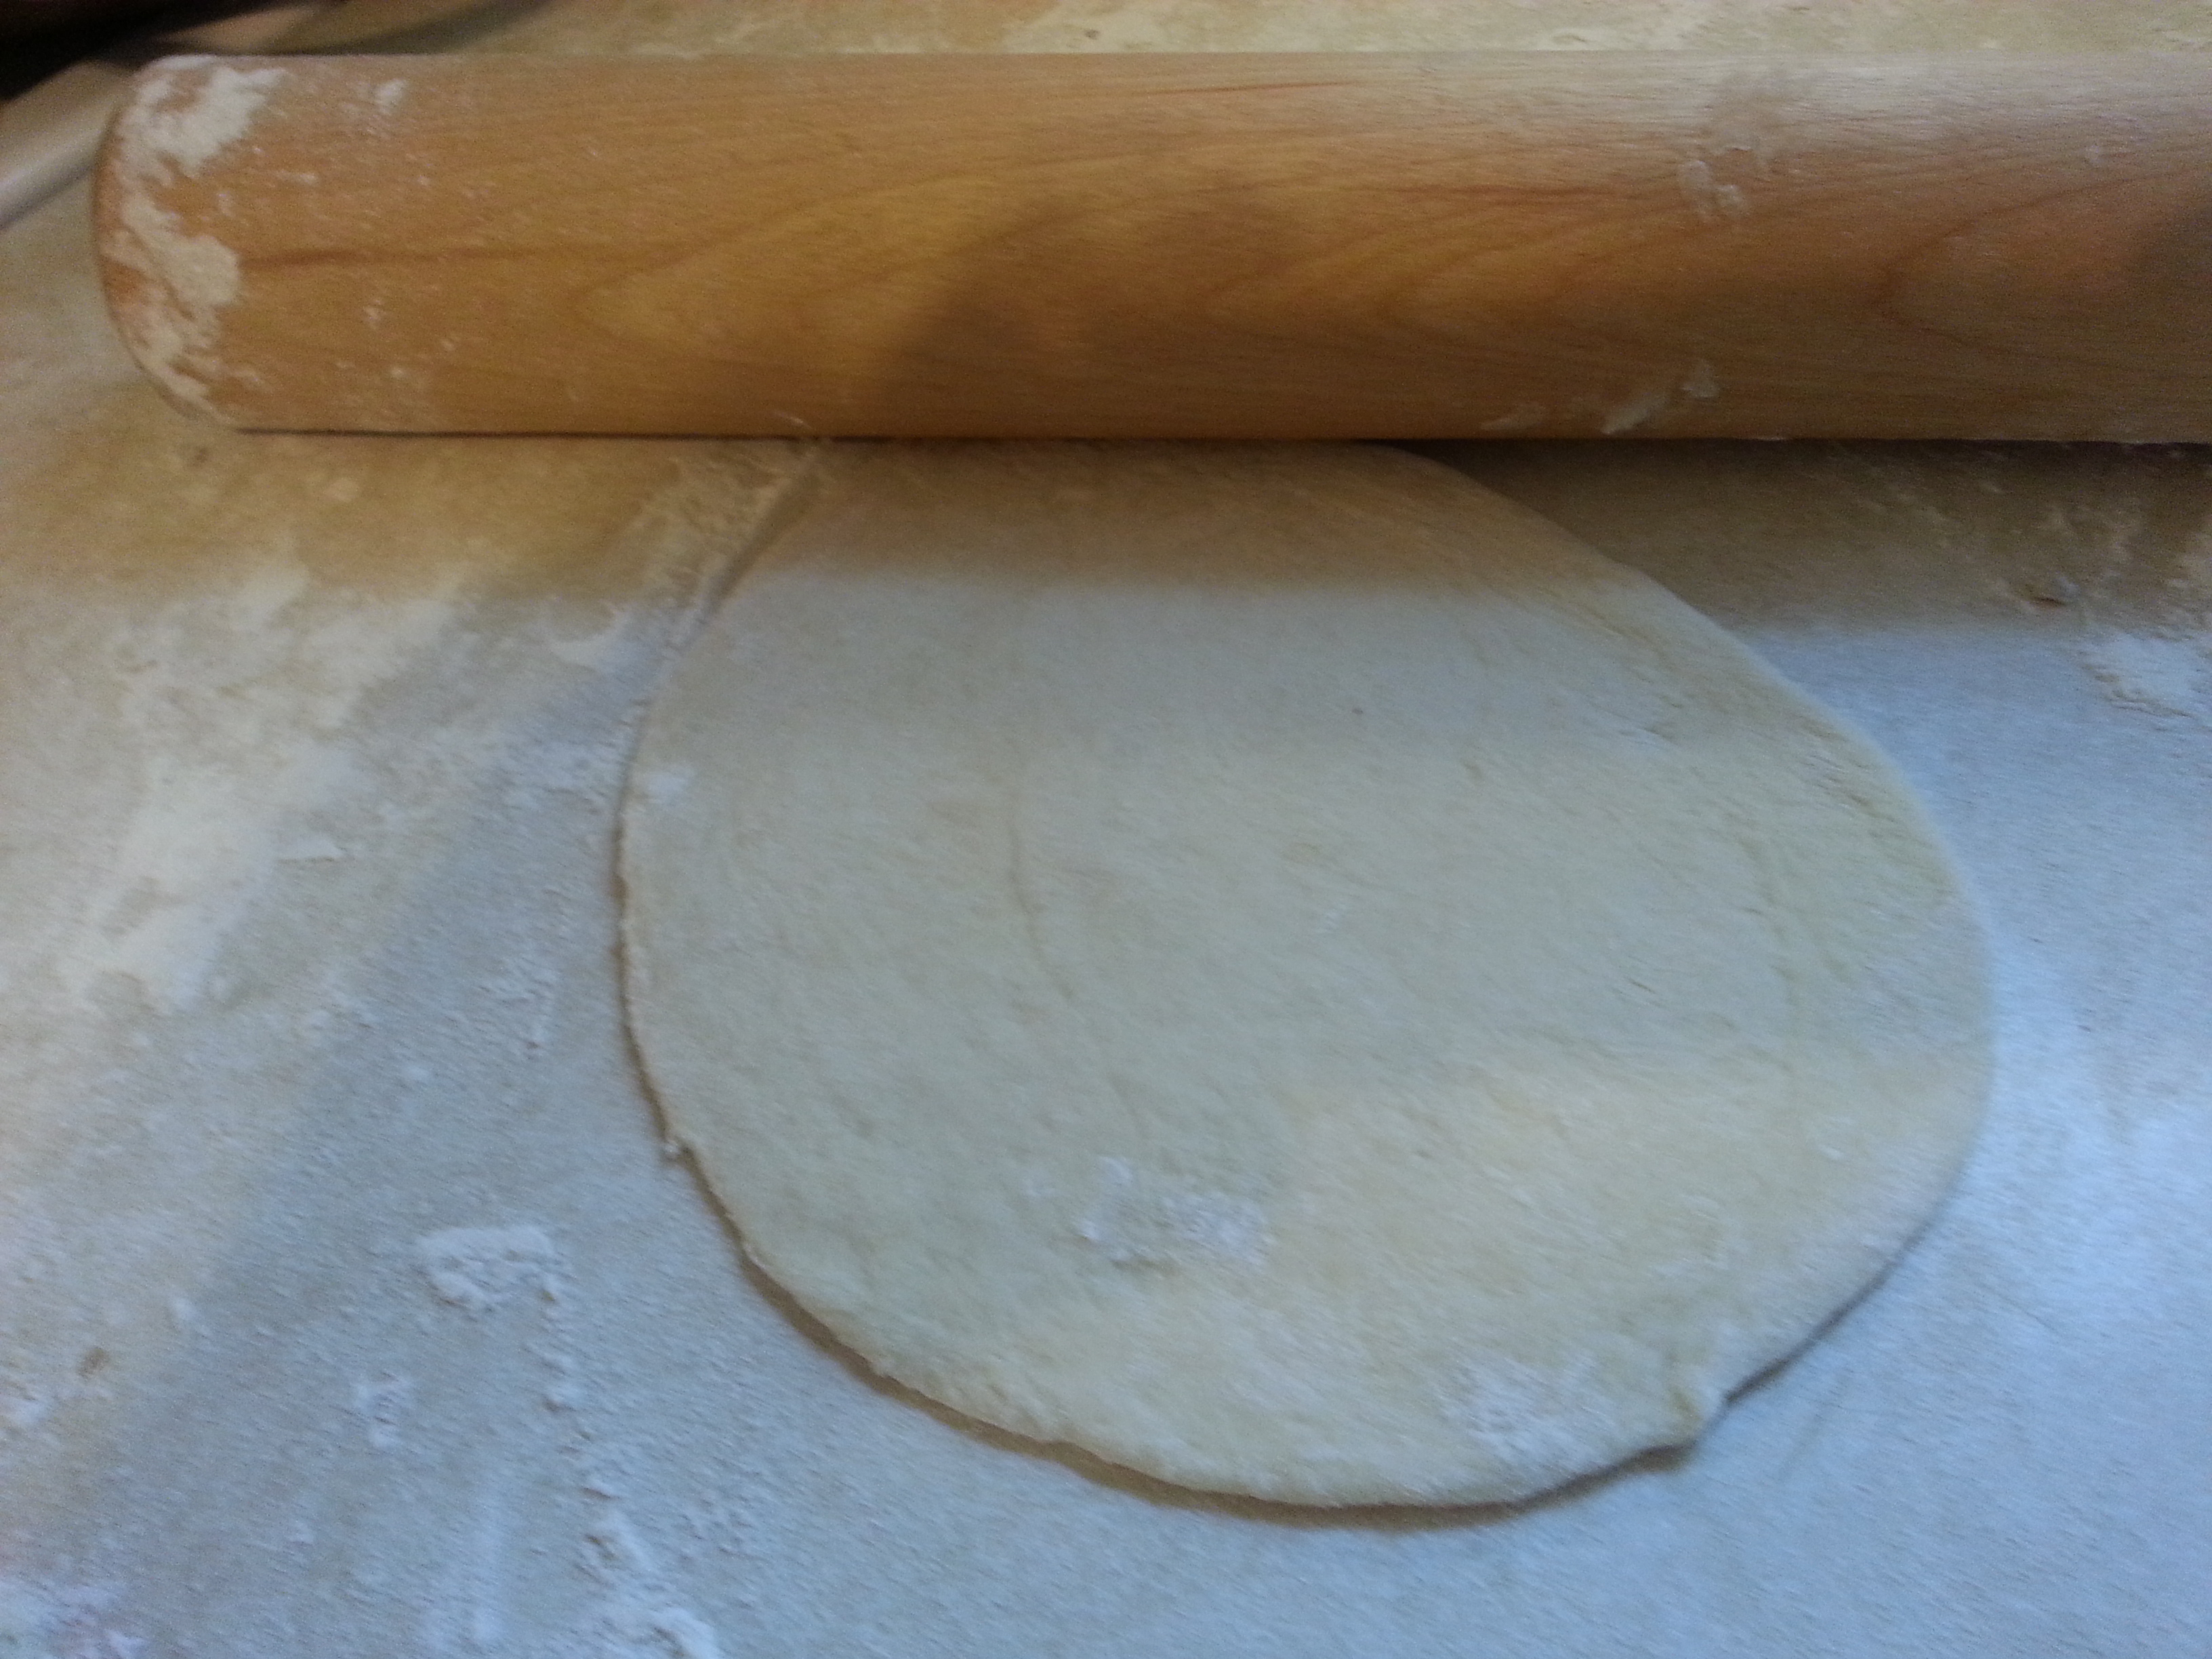 Rolled circles of dough